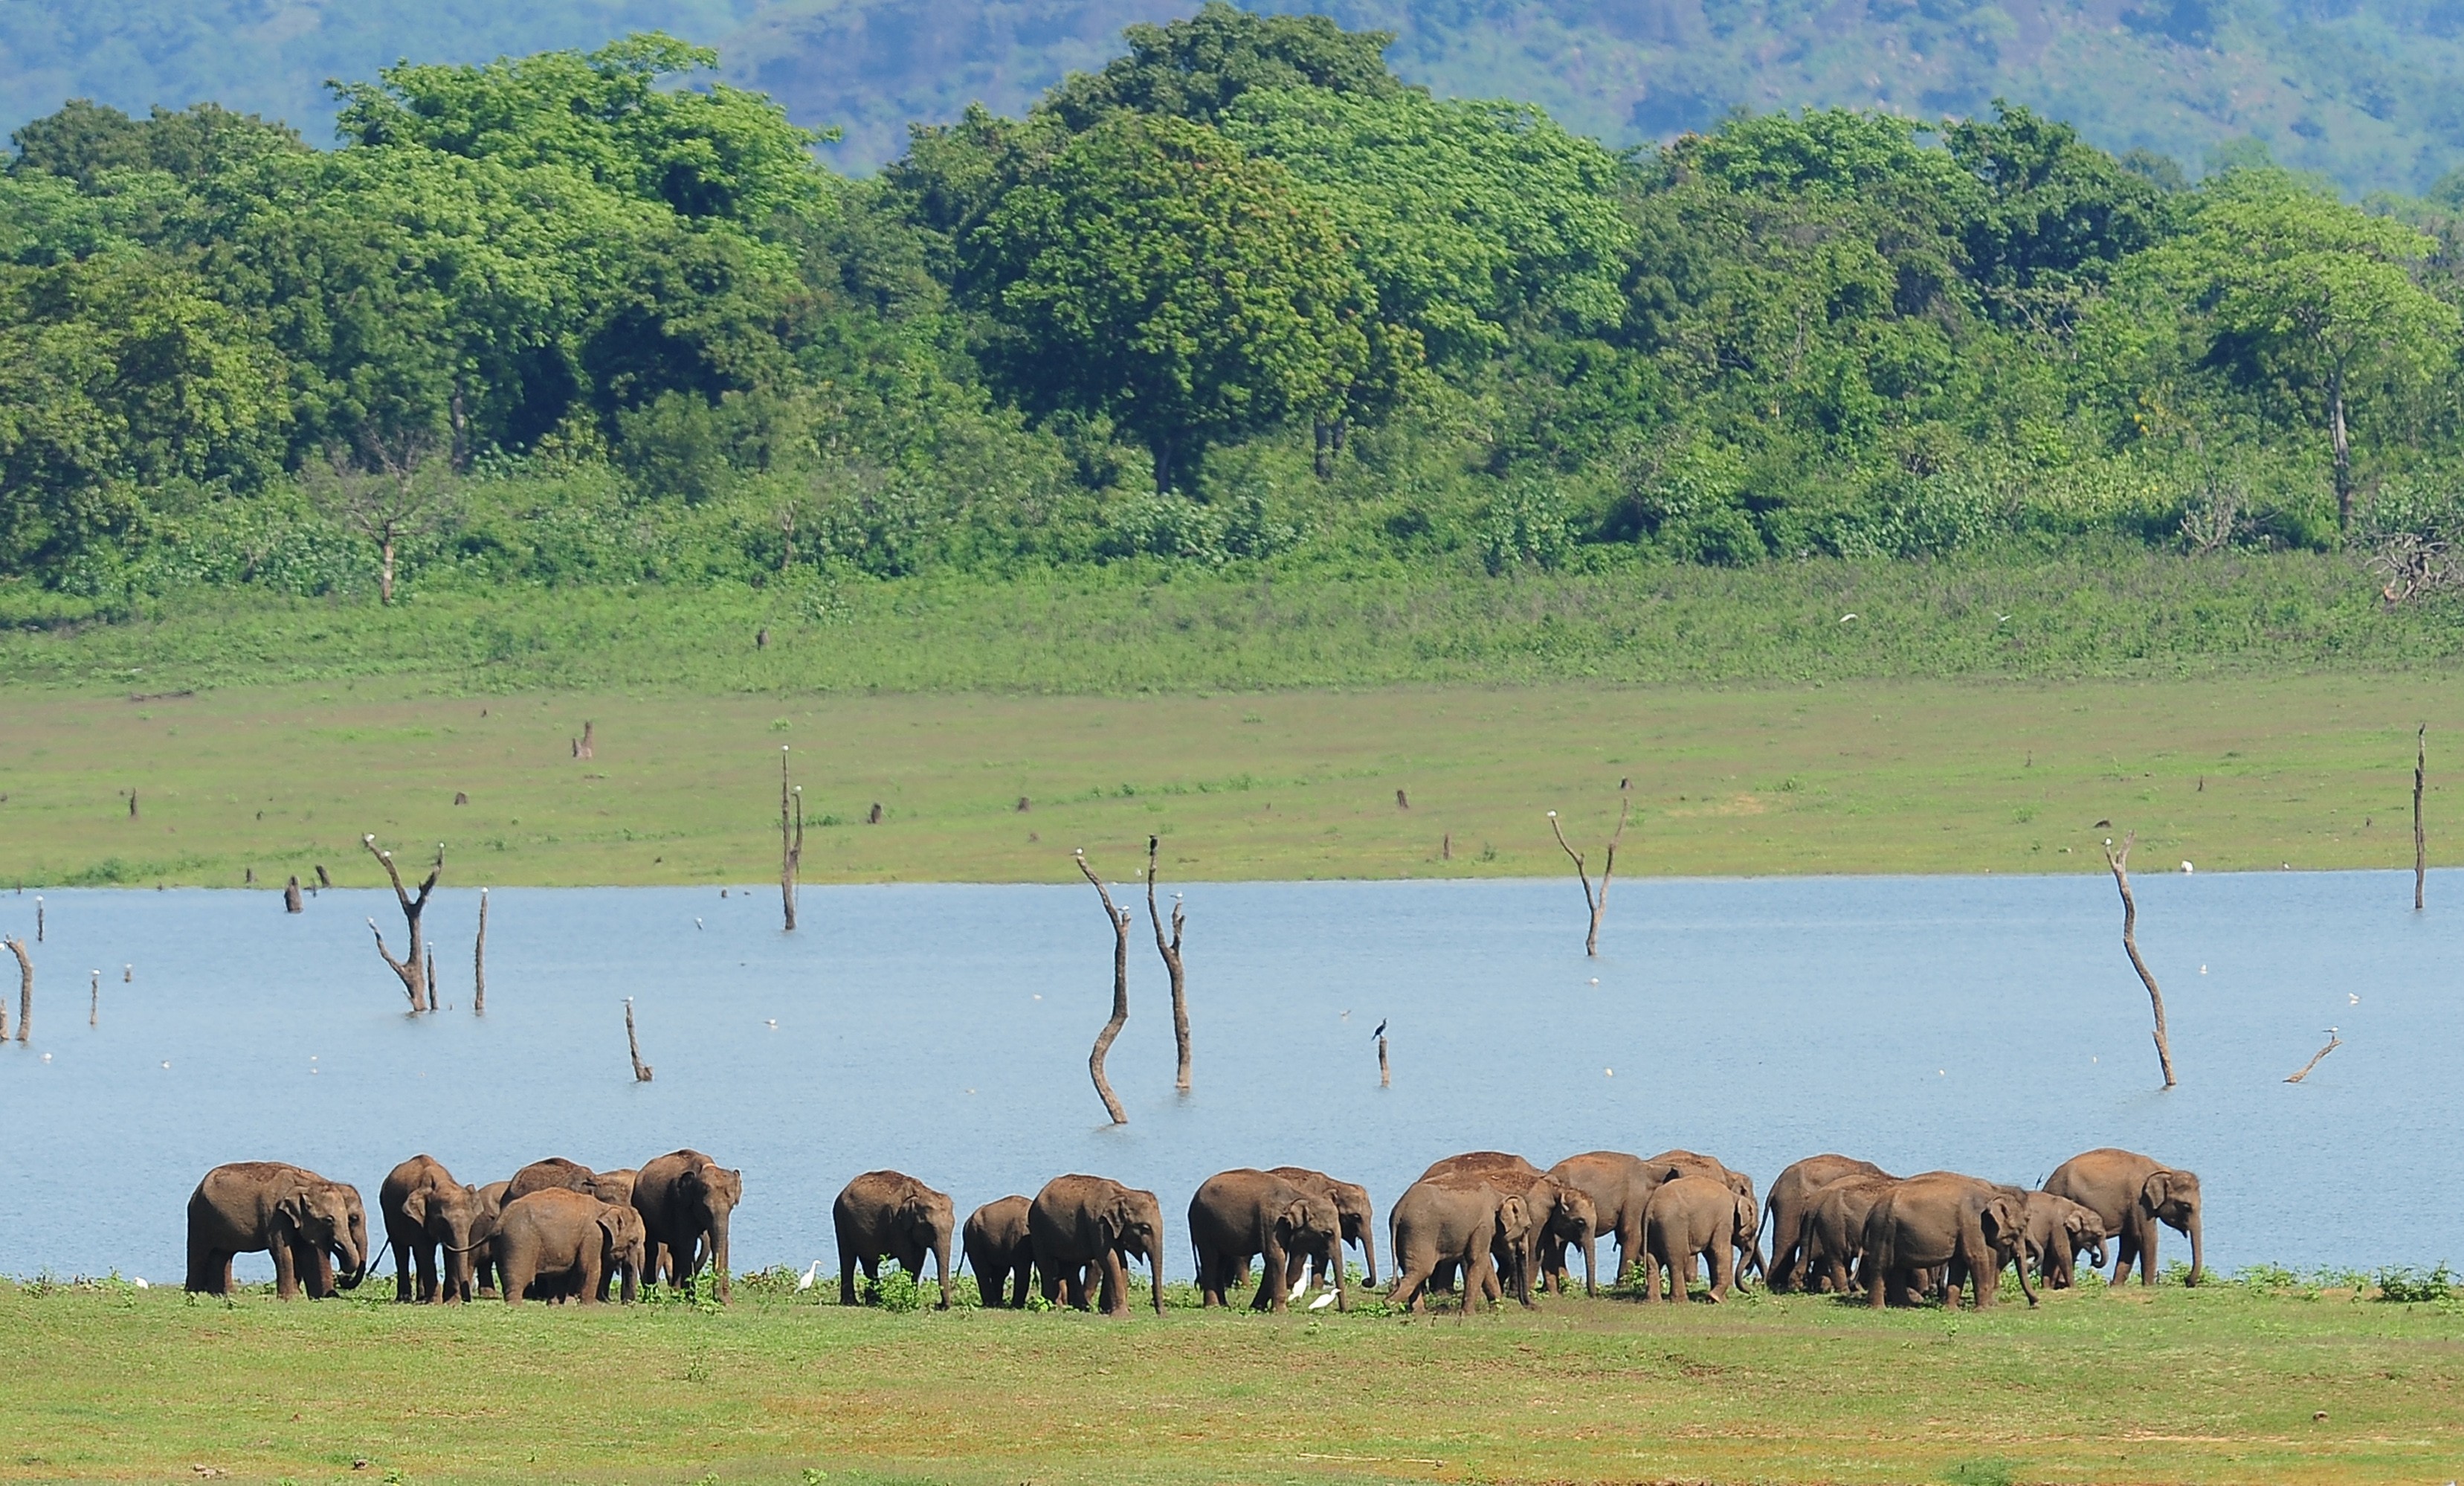 The Sri Lankan government had hoped to use the summit to present its biodiversity, including its wildlife parks with thousands of elephants. Photo: AFP